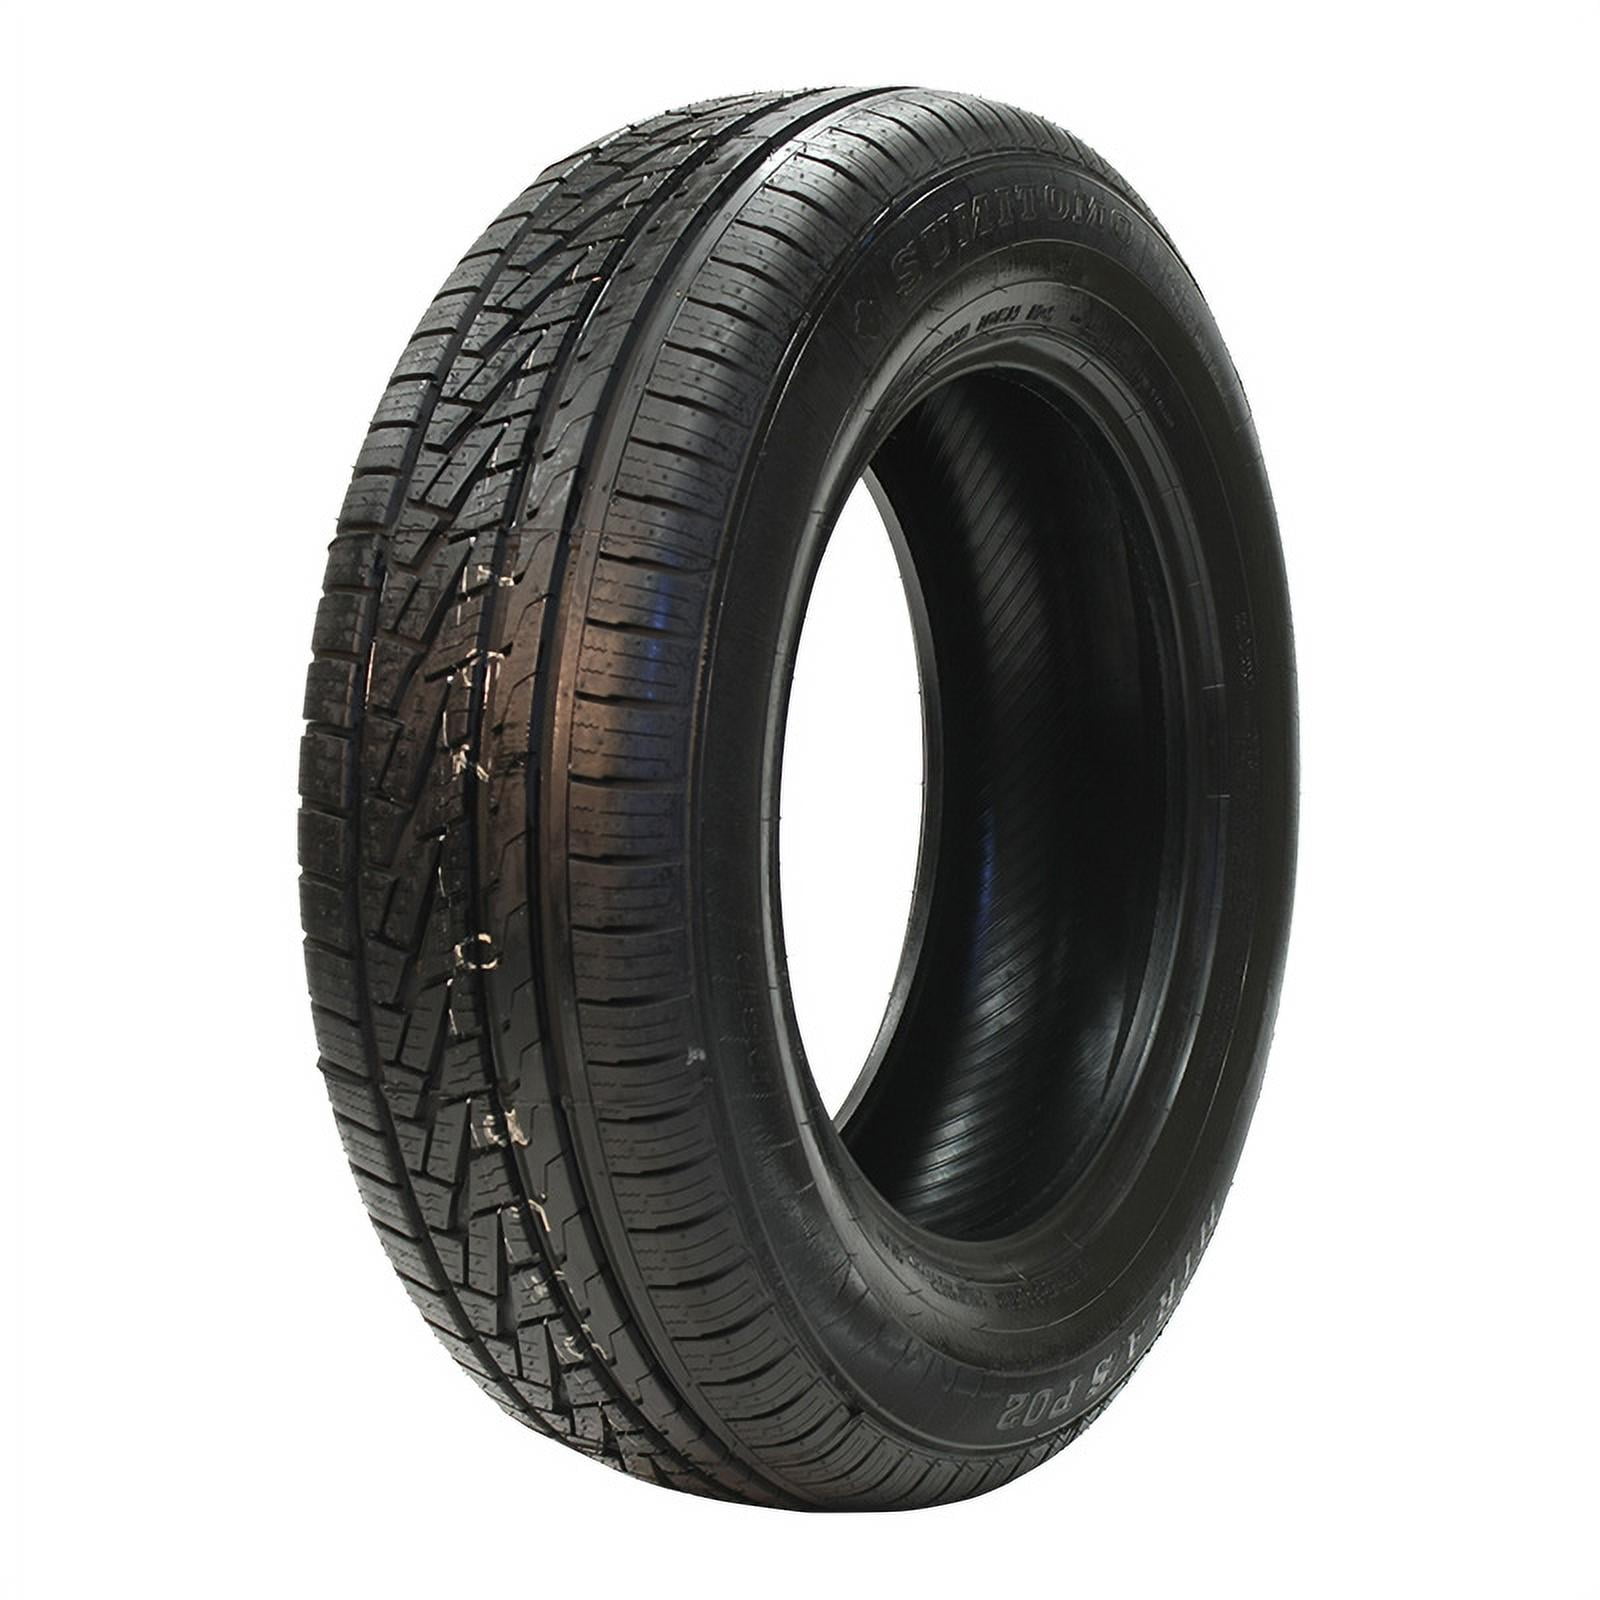 Sumitomo Tire HTR A/S P02 Performance Radial Tire 205/55R16 94W 